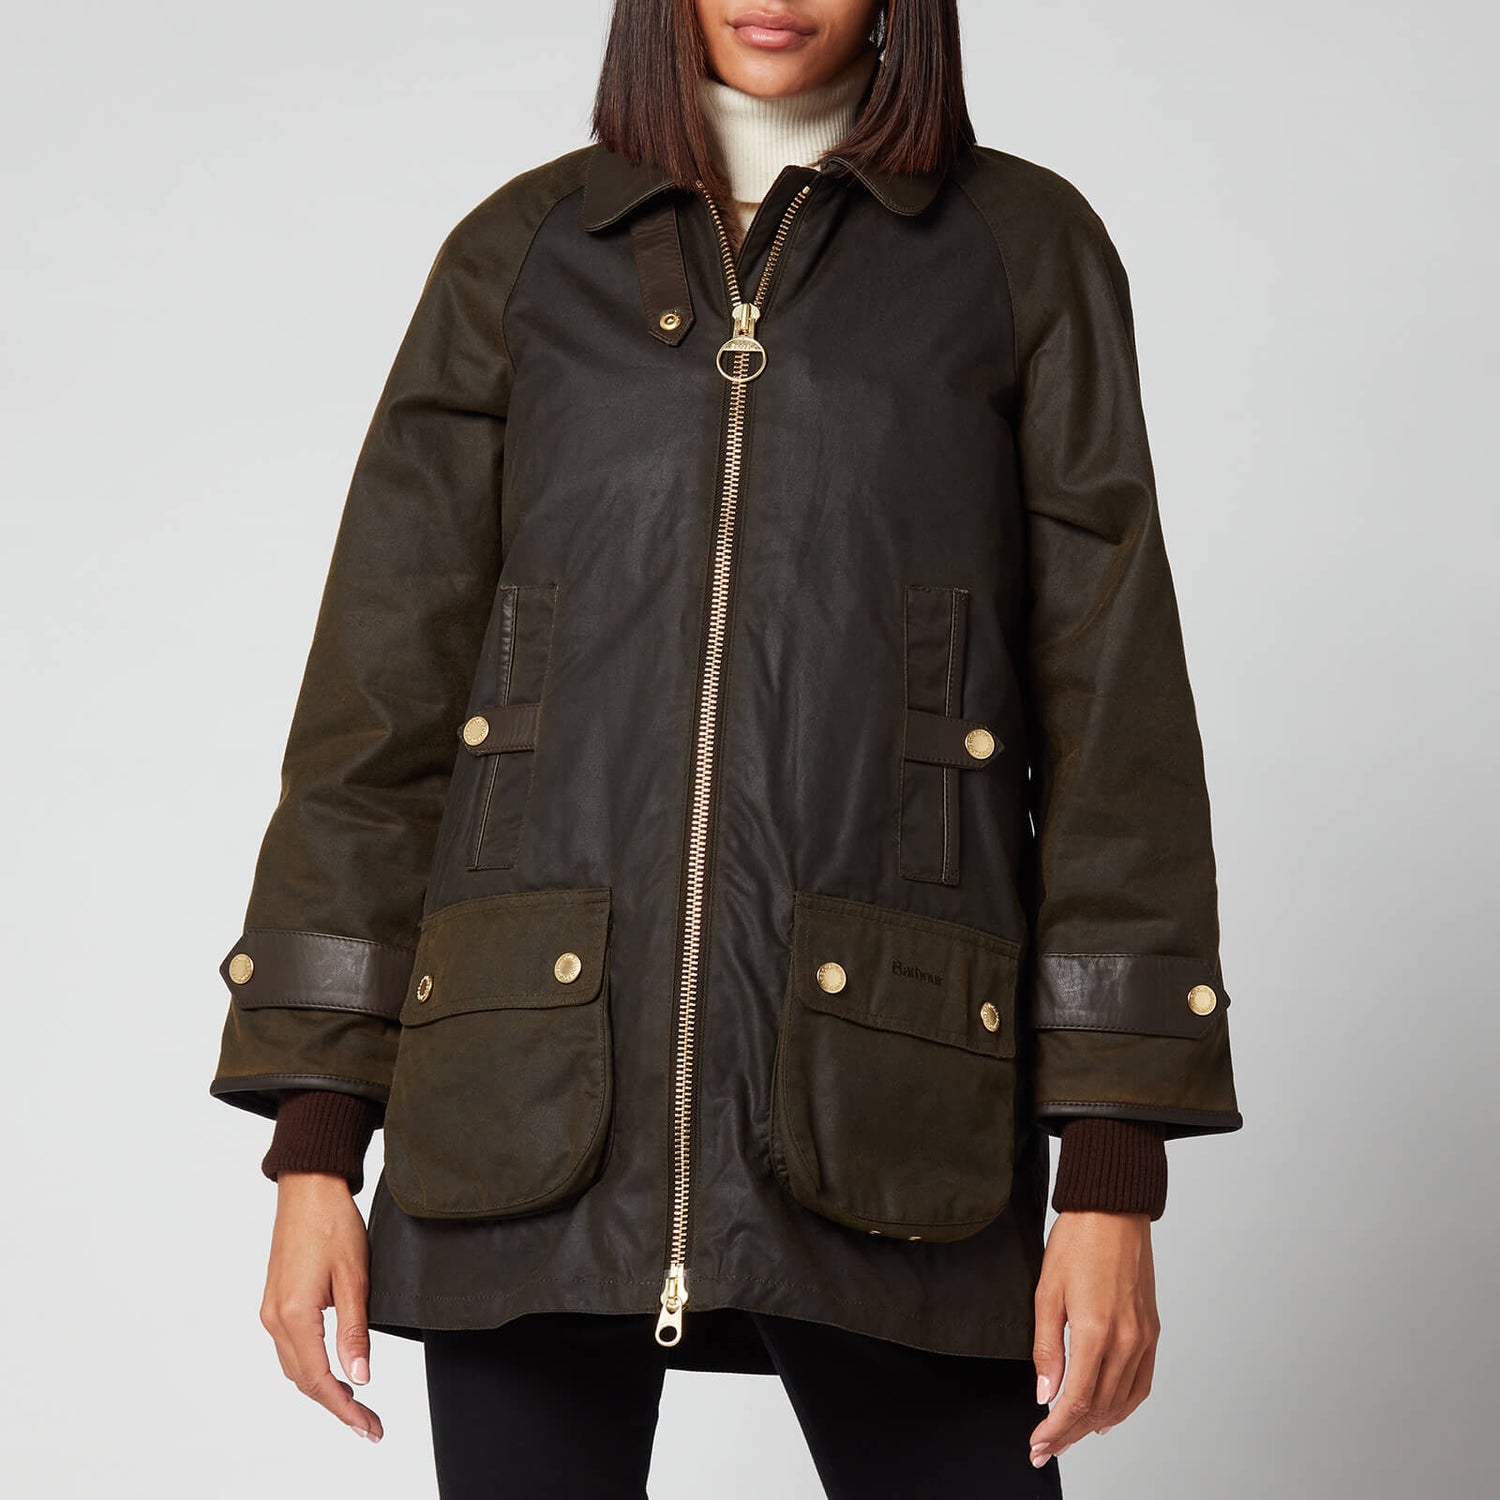 Barbour Women's Norwood Wax Jacket - Olive/Classic